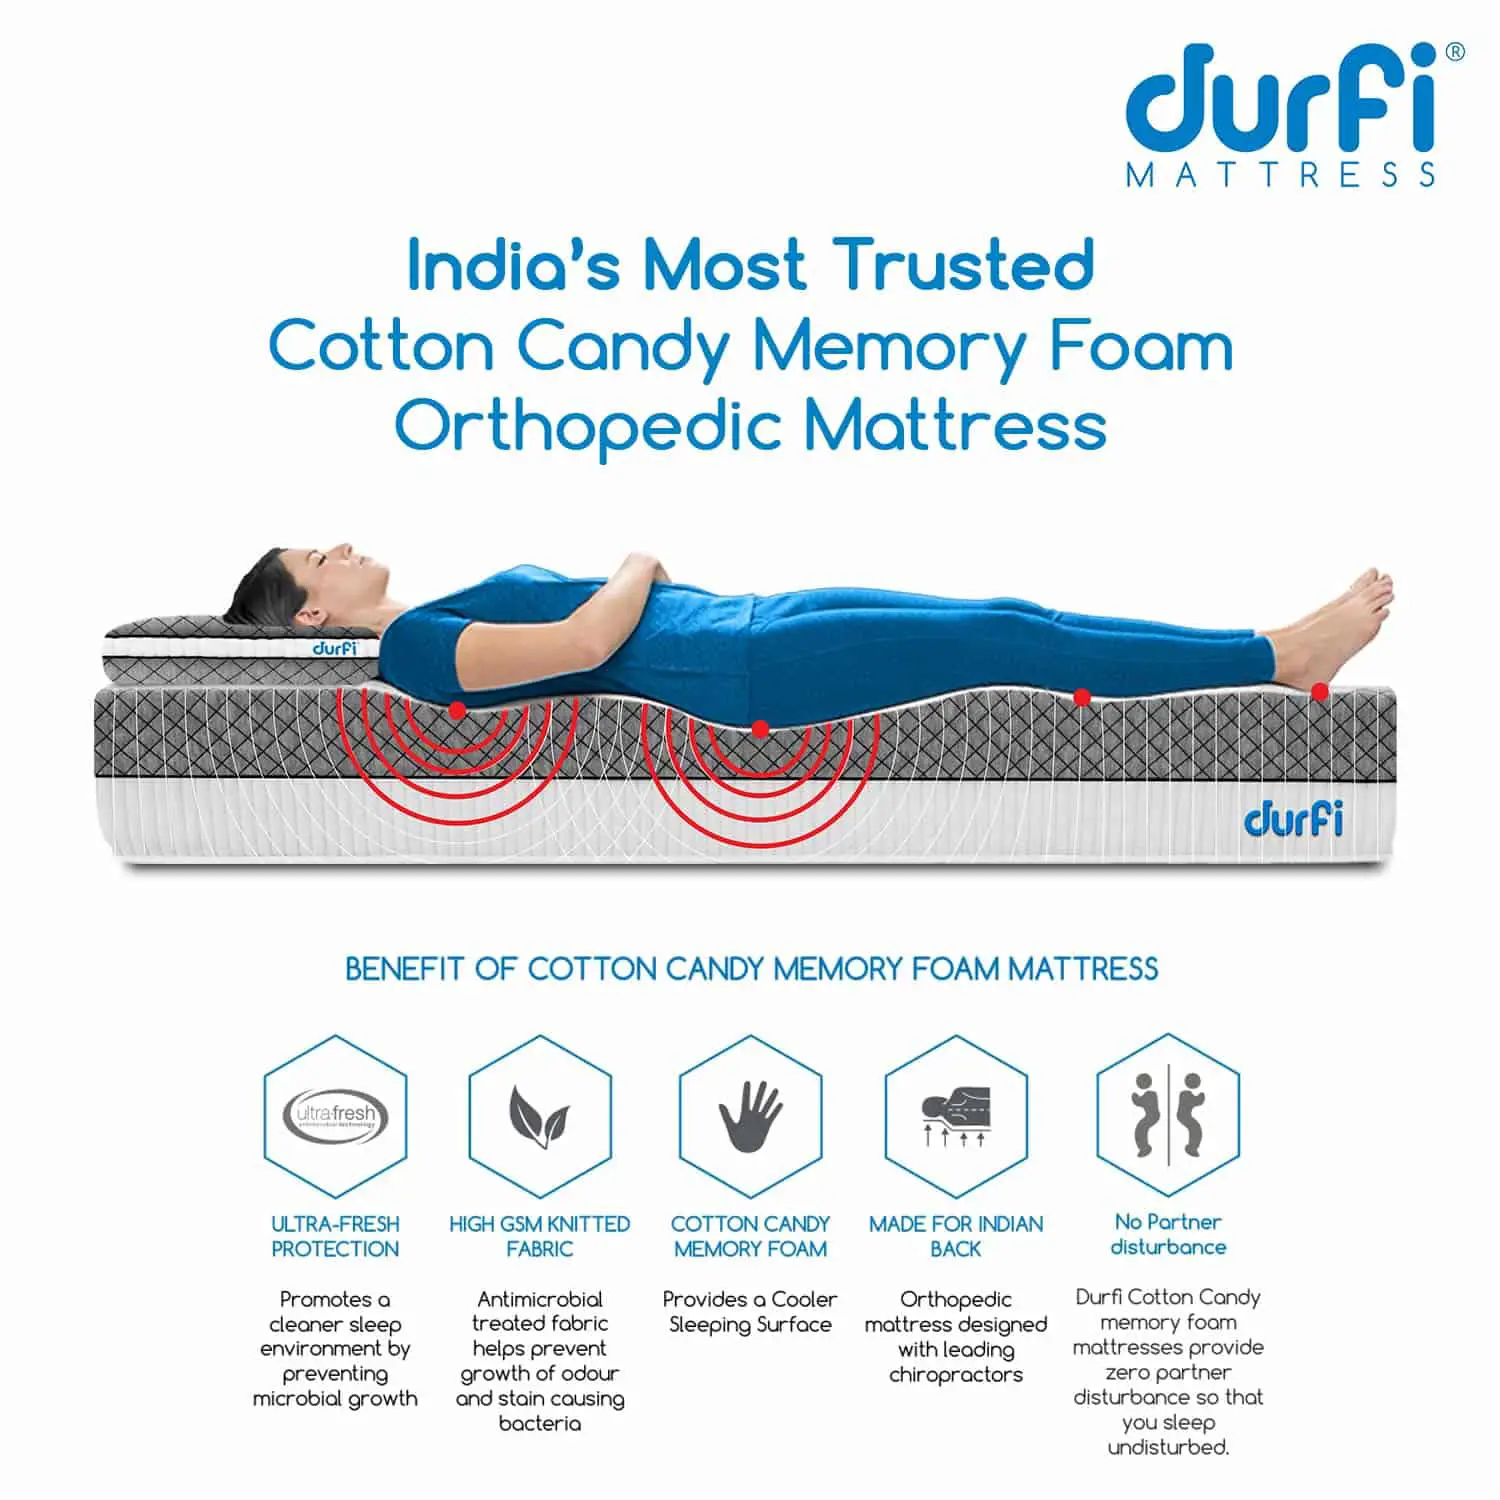 10 Best mattress for back pain in India (2022)